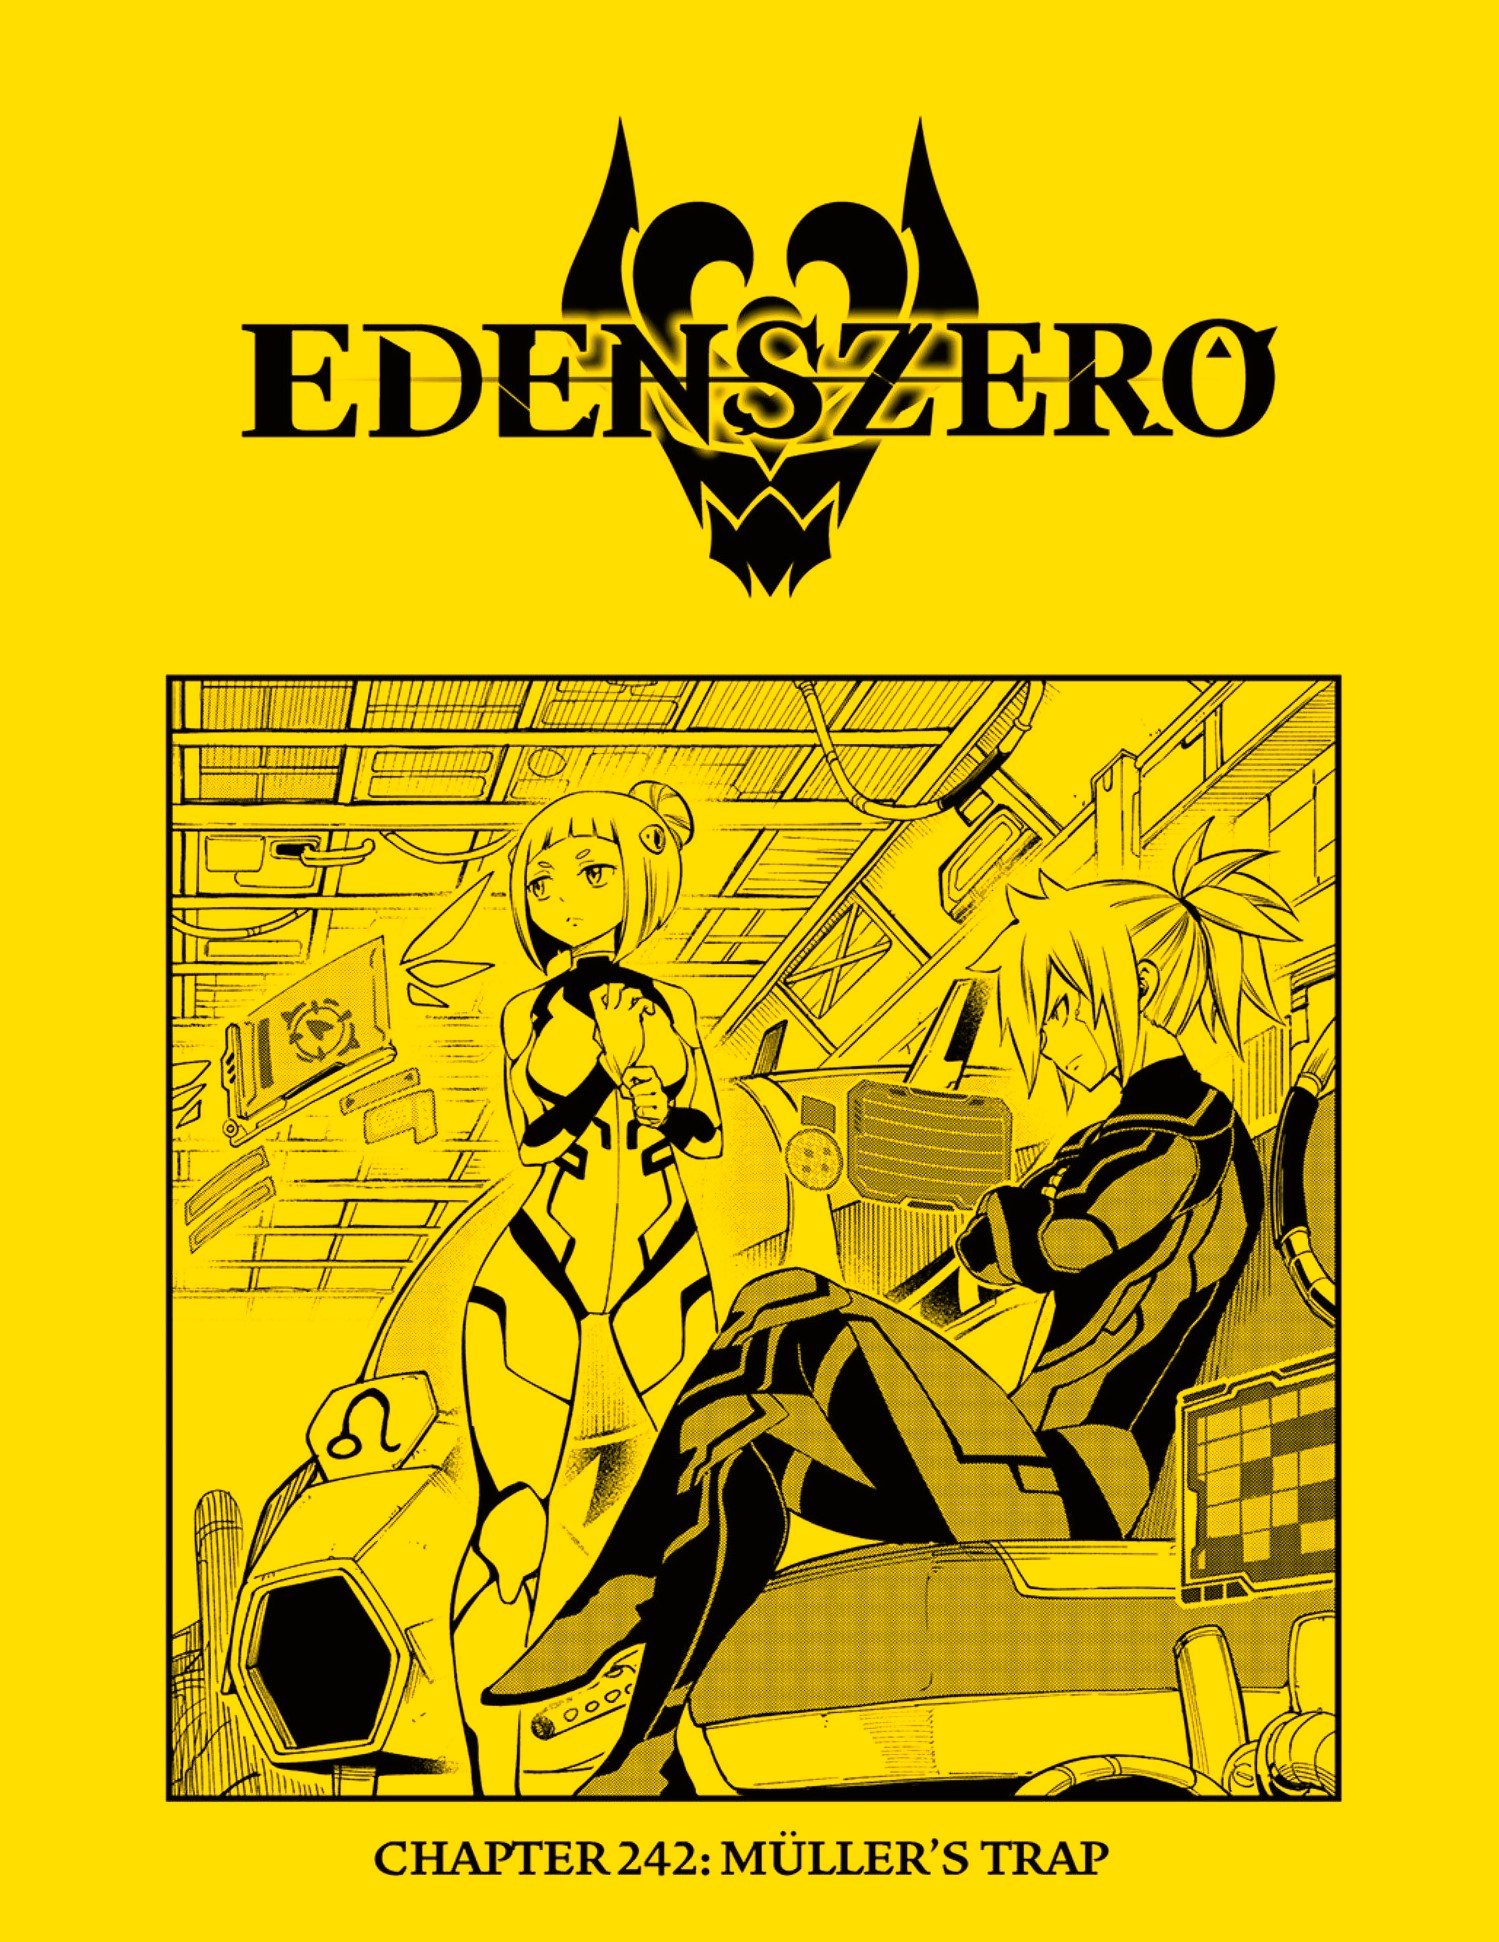 It’s A Trap! Or Did You Know That Already? Edens Zero Chapter 242 BREAKDOWN